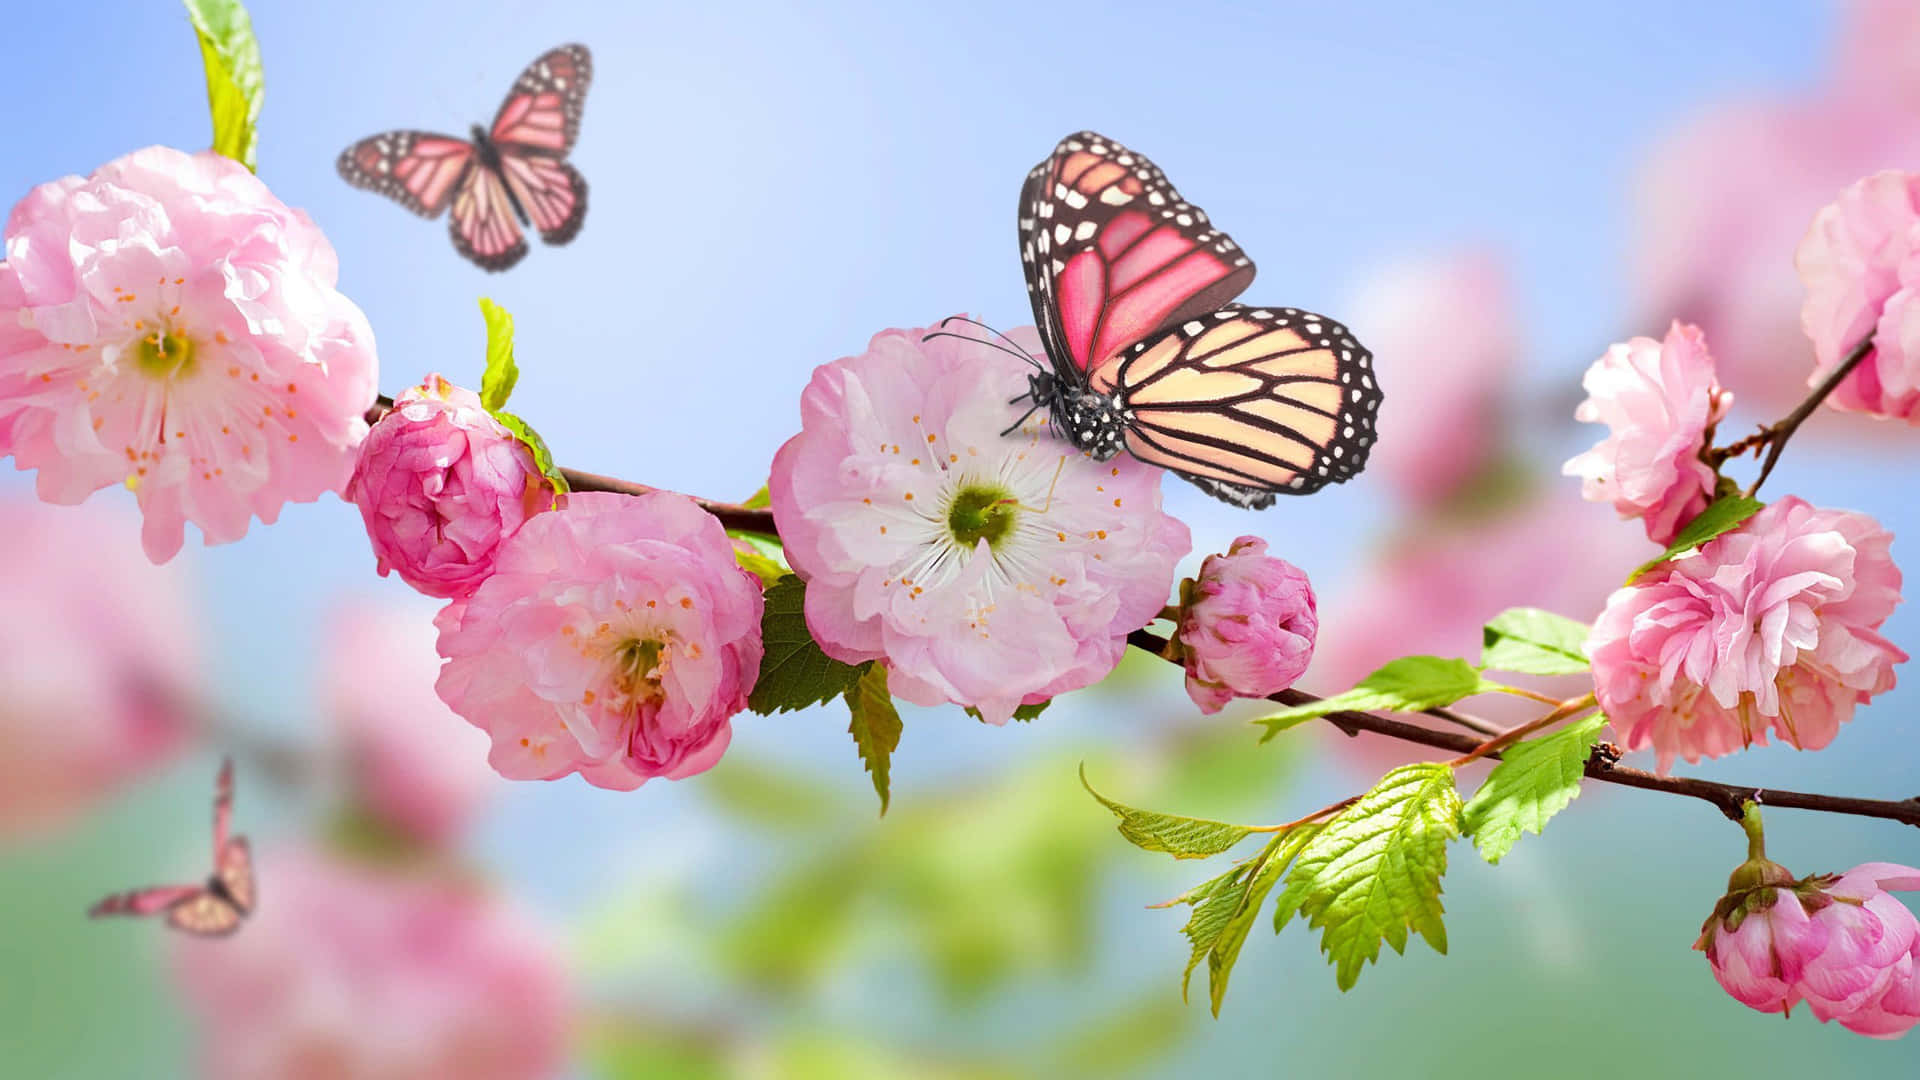 100+] Flowers And Butterflies Background s 